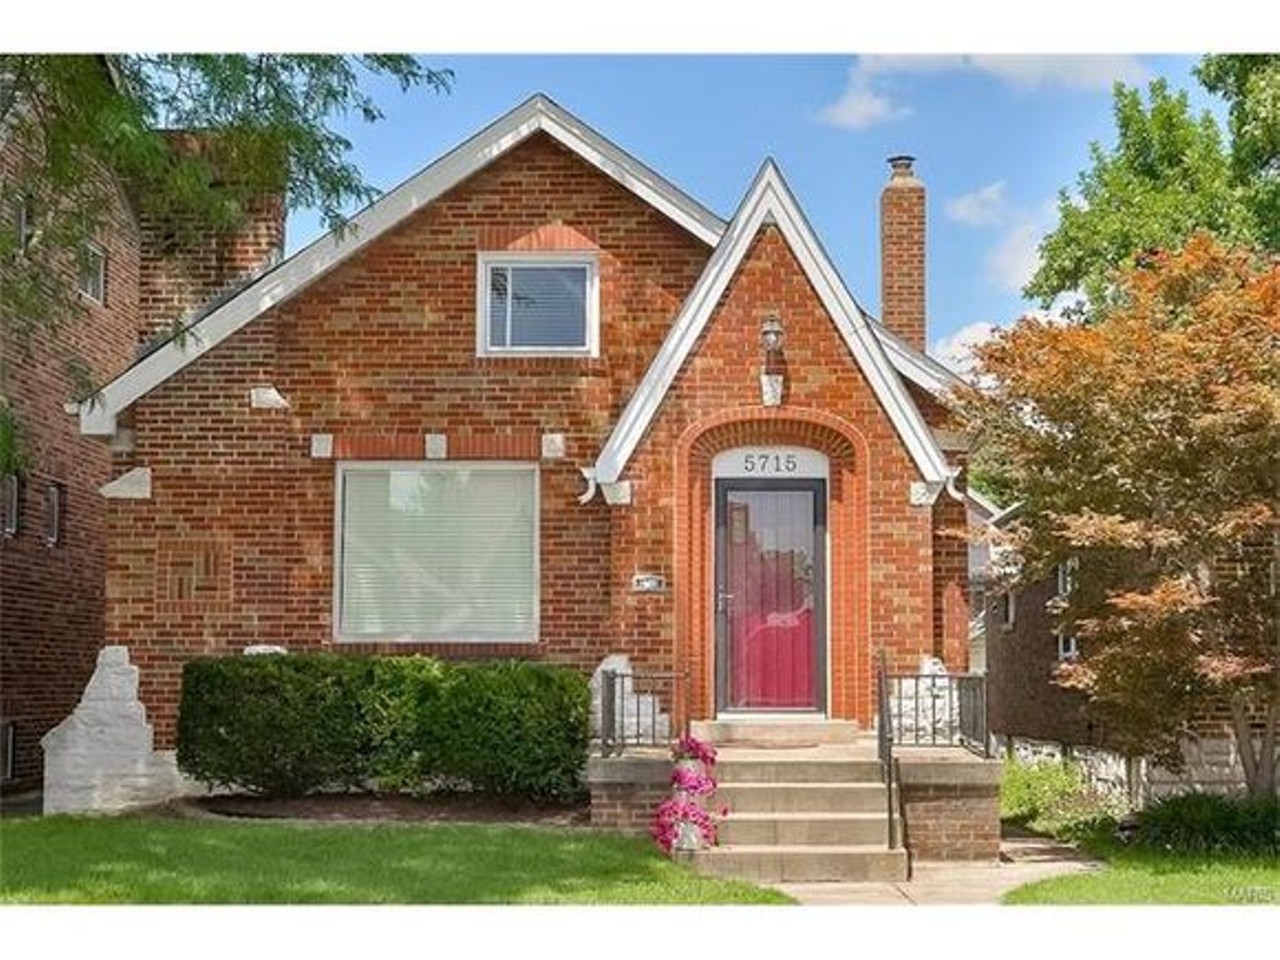 5715 Nottingham Avenue
St Louis, MO , 63109
$155,000
2 beds / 1 baths / 1,008 sqft / 3,703 lot sqft
This Southampton Gingerbread home has the charm you're looking for, while also being well-maintained.